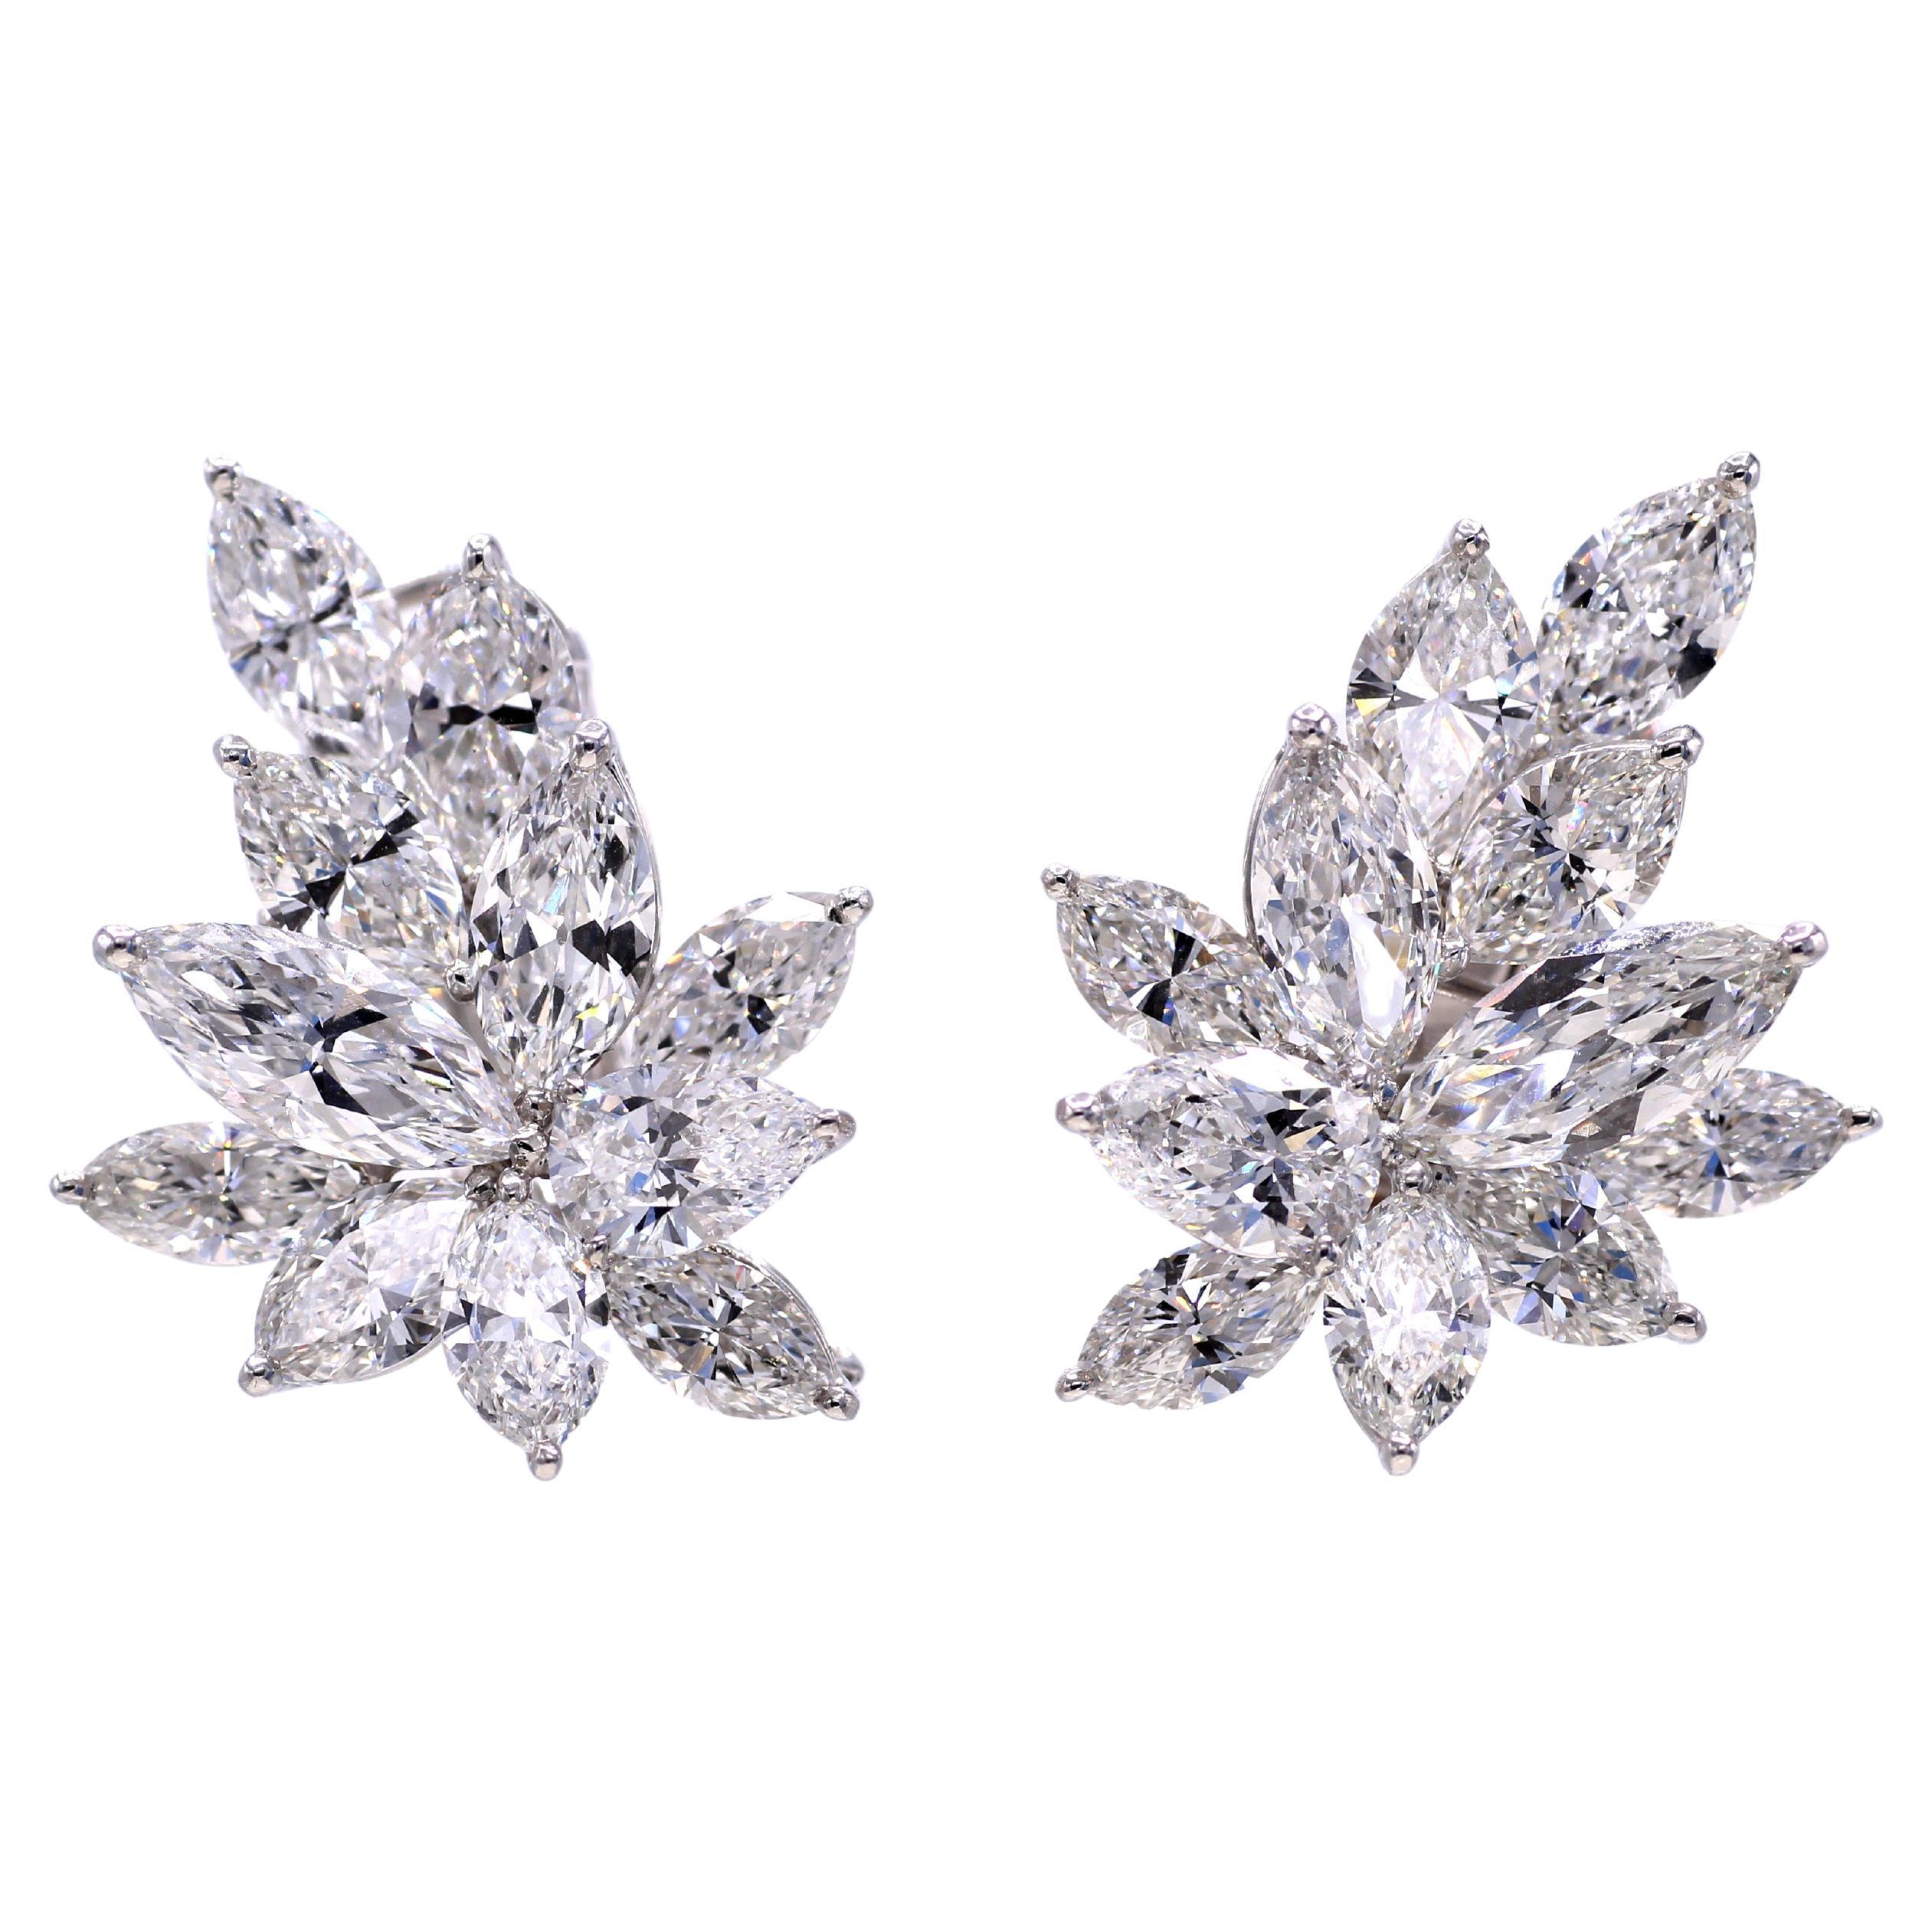 Stunning 16.58 Carat GIA Certified Diamond Platinum Cluster Earrings For Sale